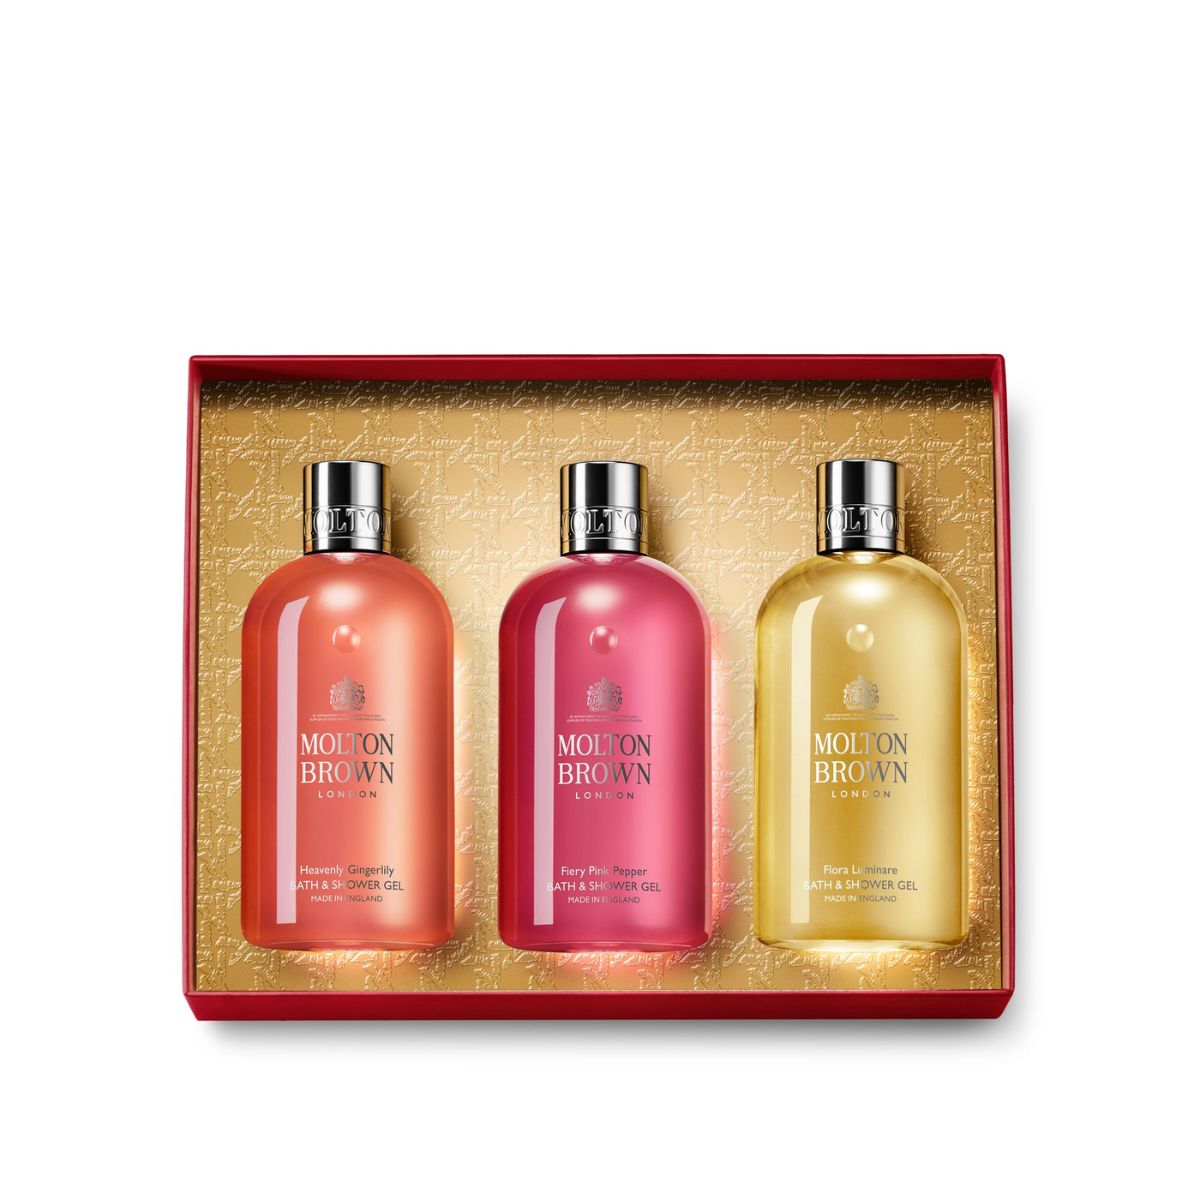 Molton Brown Floral & Spicy Body Care Collection.